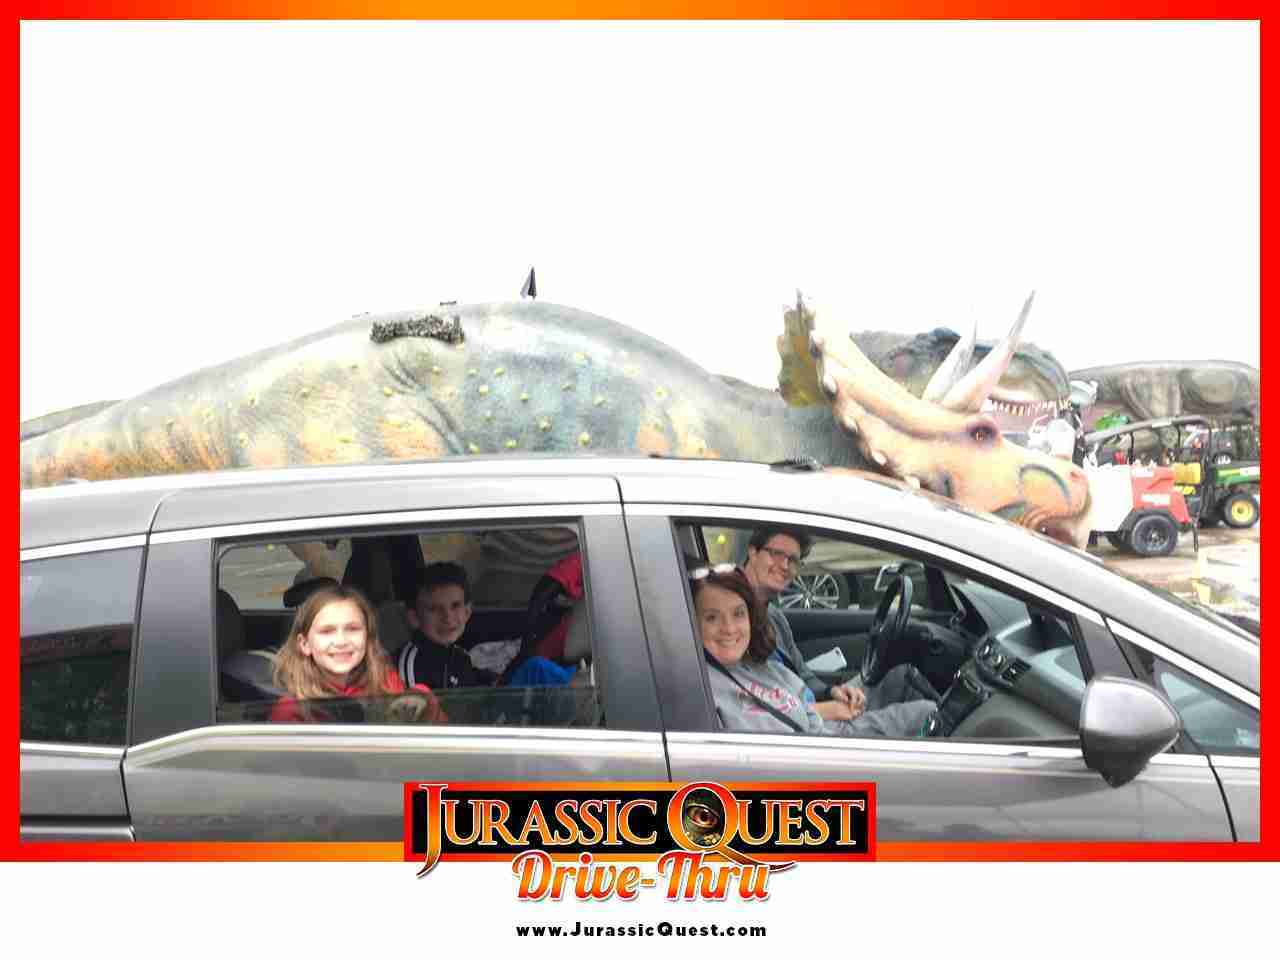 jurassic quest, life size dinosaurs, family fun, st louis activities, drive thru experience, family picture